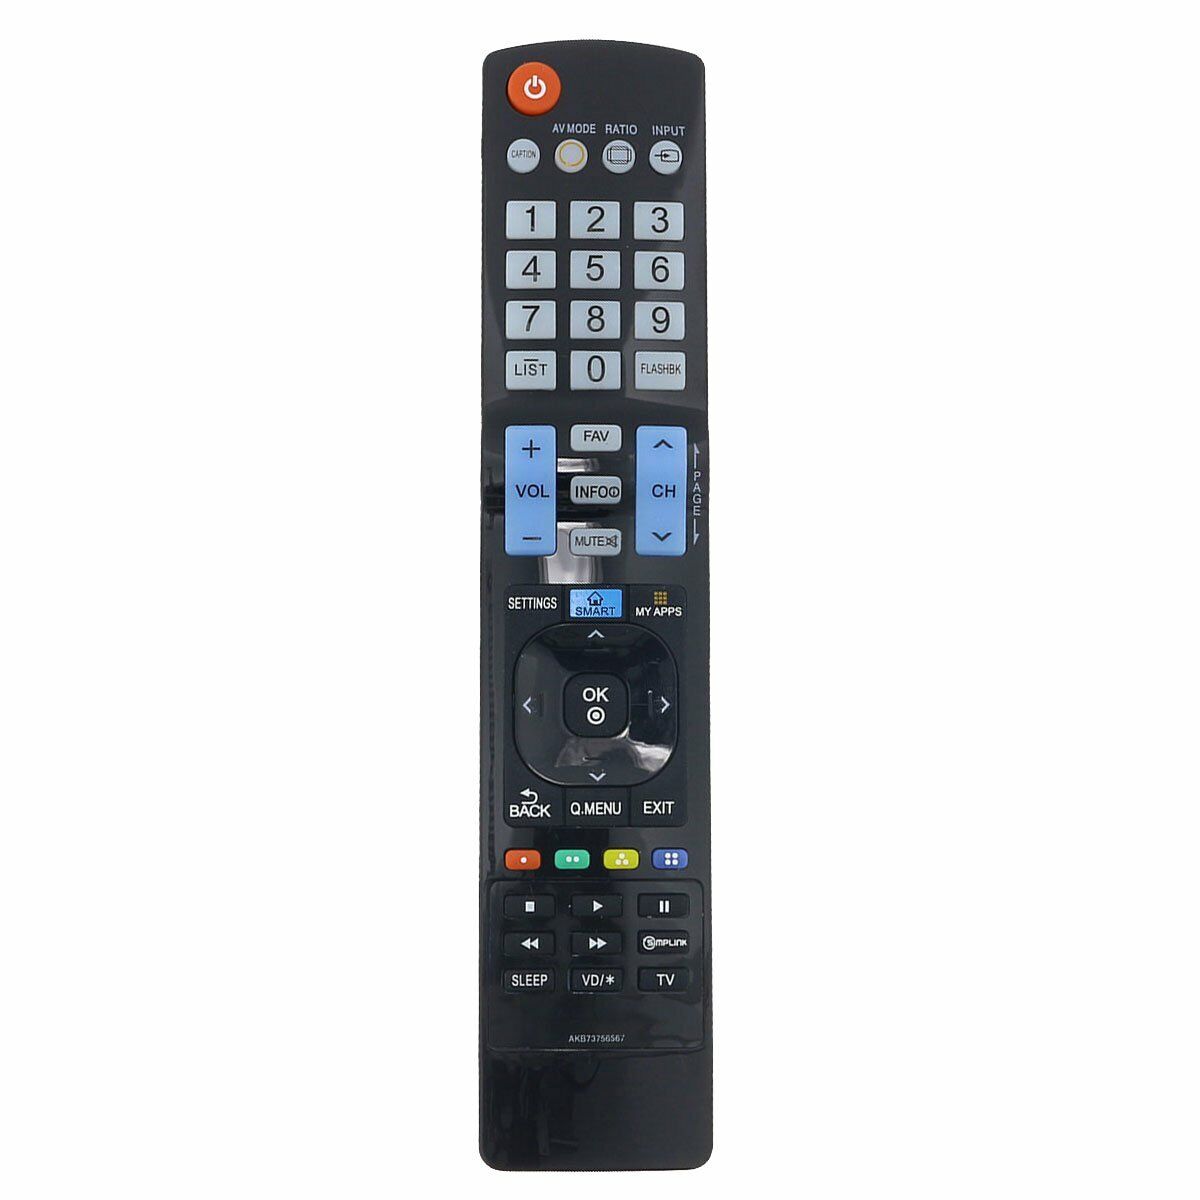 New LG Replacement TV Remote Control AKB73756567 for LG LED HDTV Smart TV